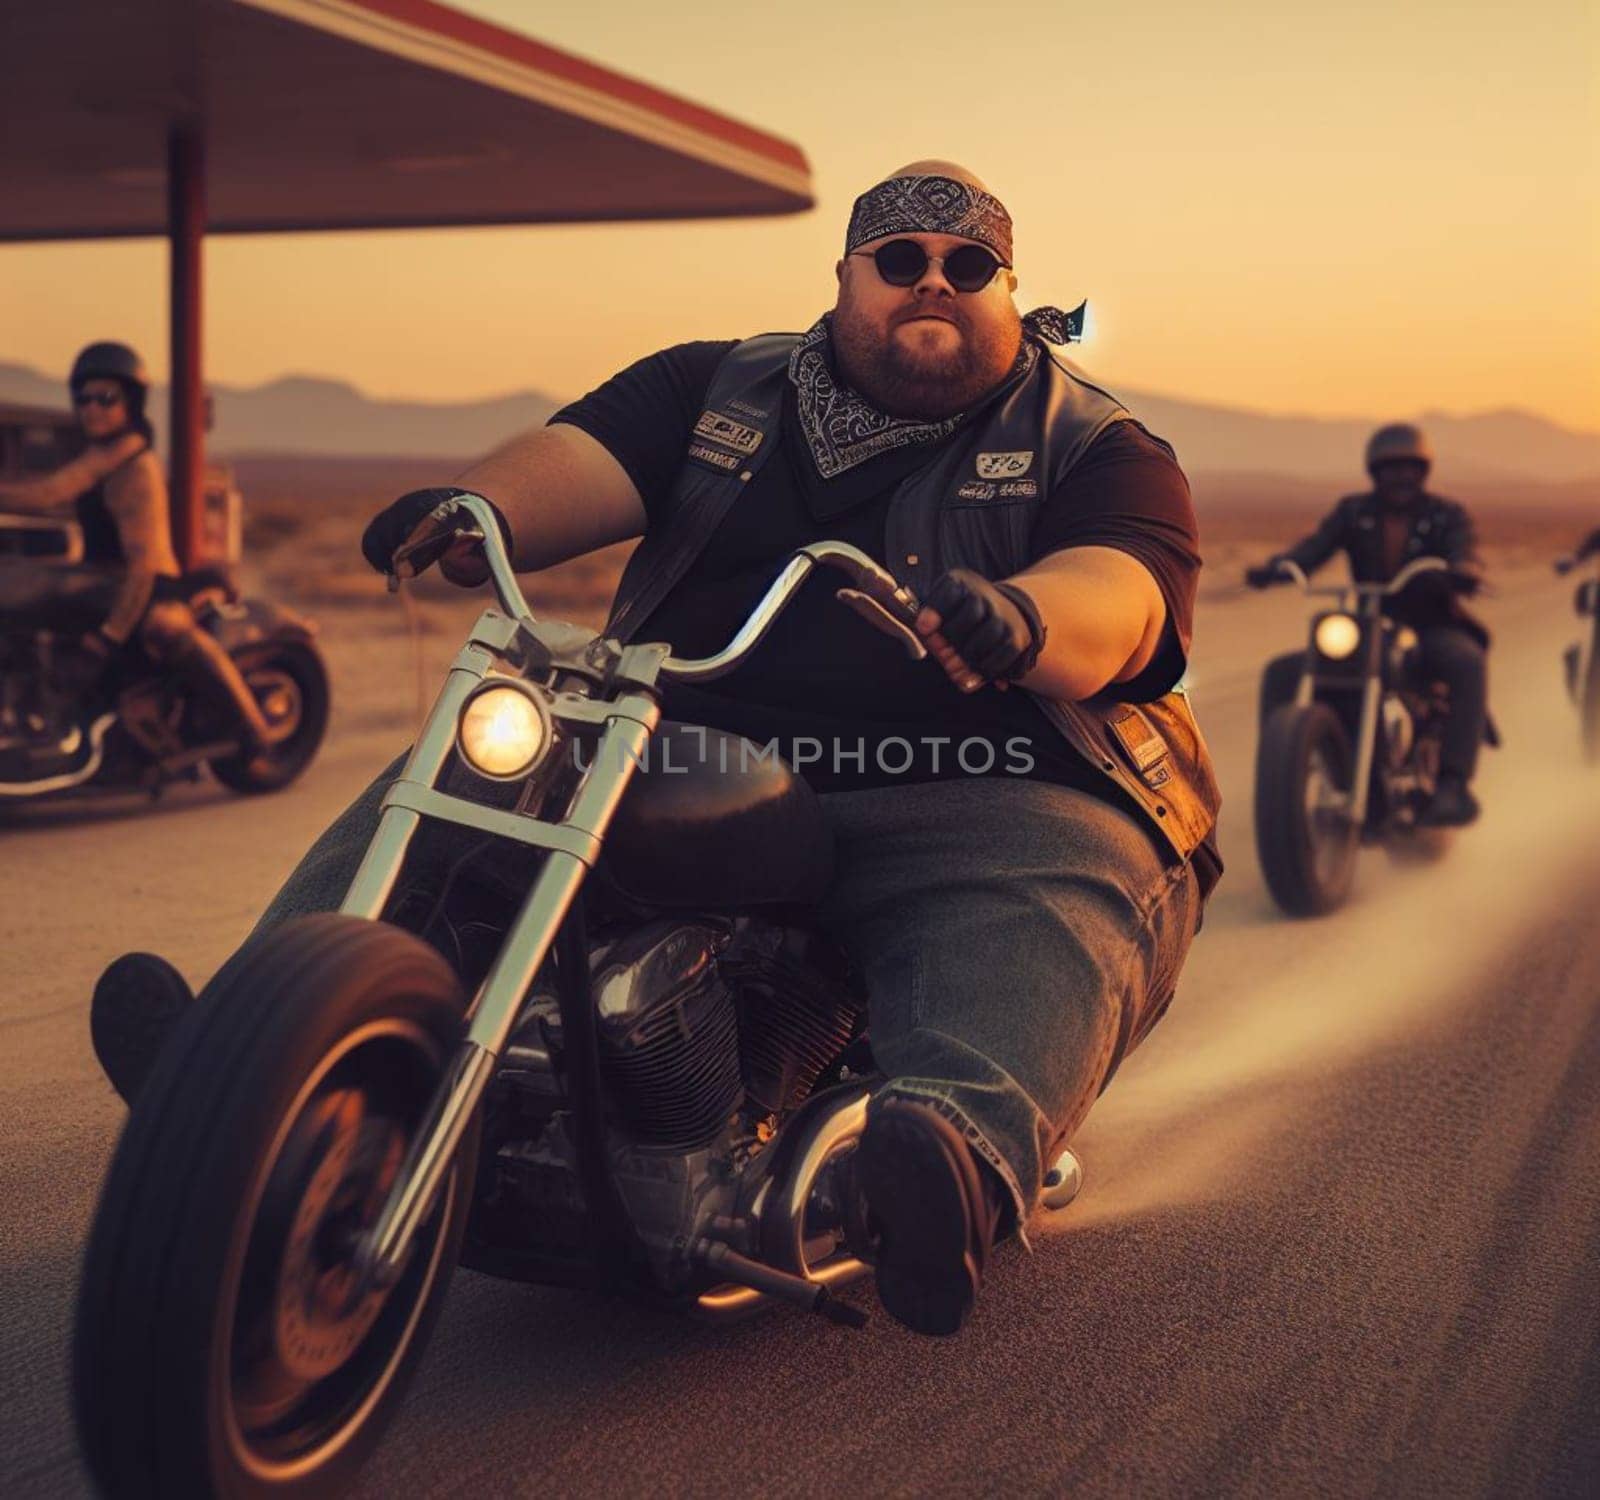 hipster vandals curvy gang wear jeans, leather, drive steampunk hotrods, customs bikes, on the road by verbano